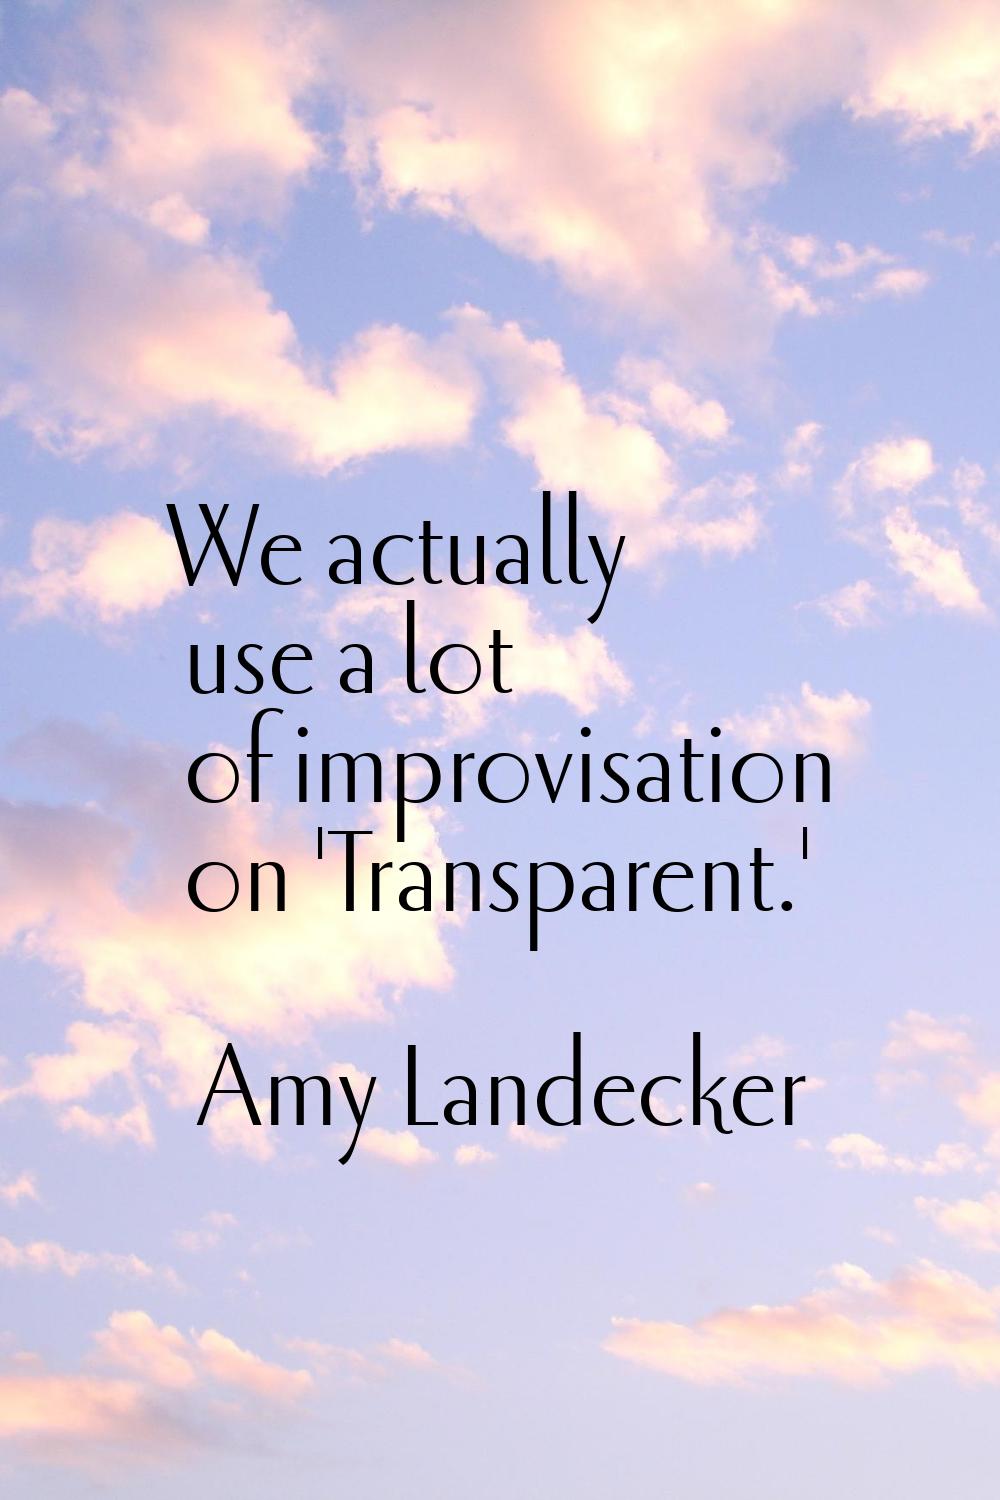 We actually use a lot of improvisation on 'Transparent.'